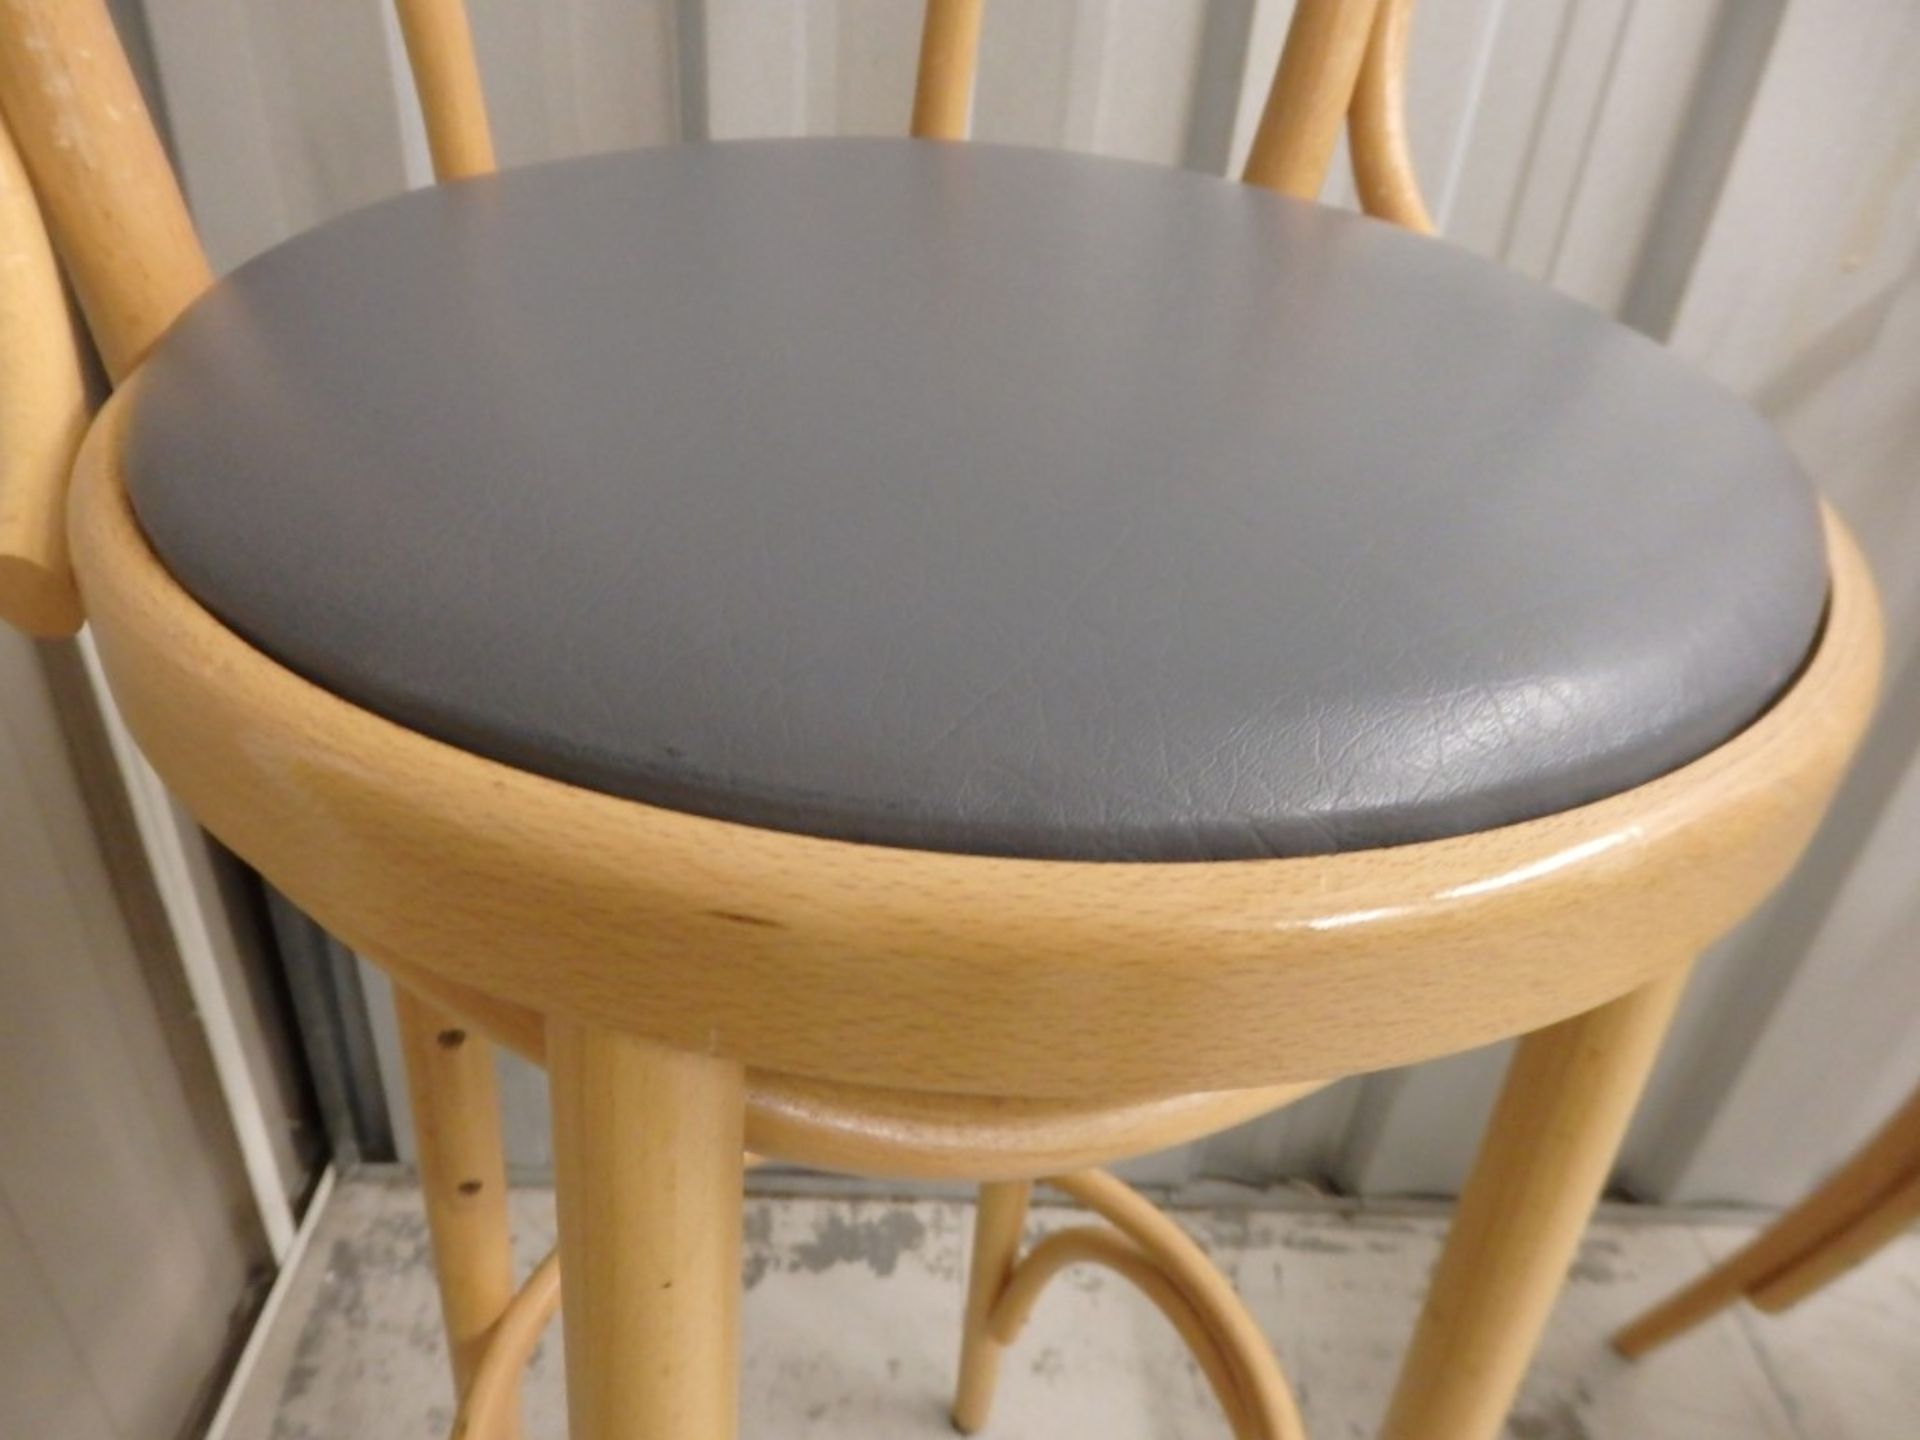 10 x Quality Barstools With Grey Leather Seat - Seat 40cm Diameter x Height 82cm (back height 114cm) - Image 3 of 6